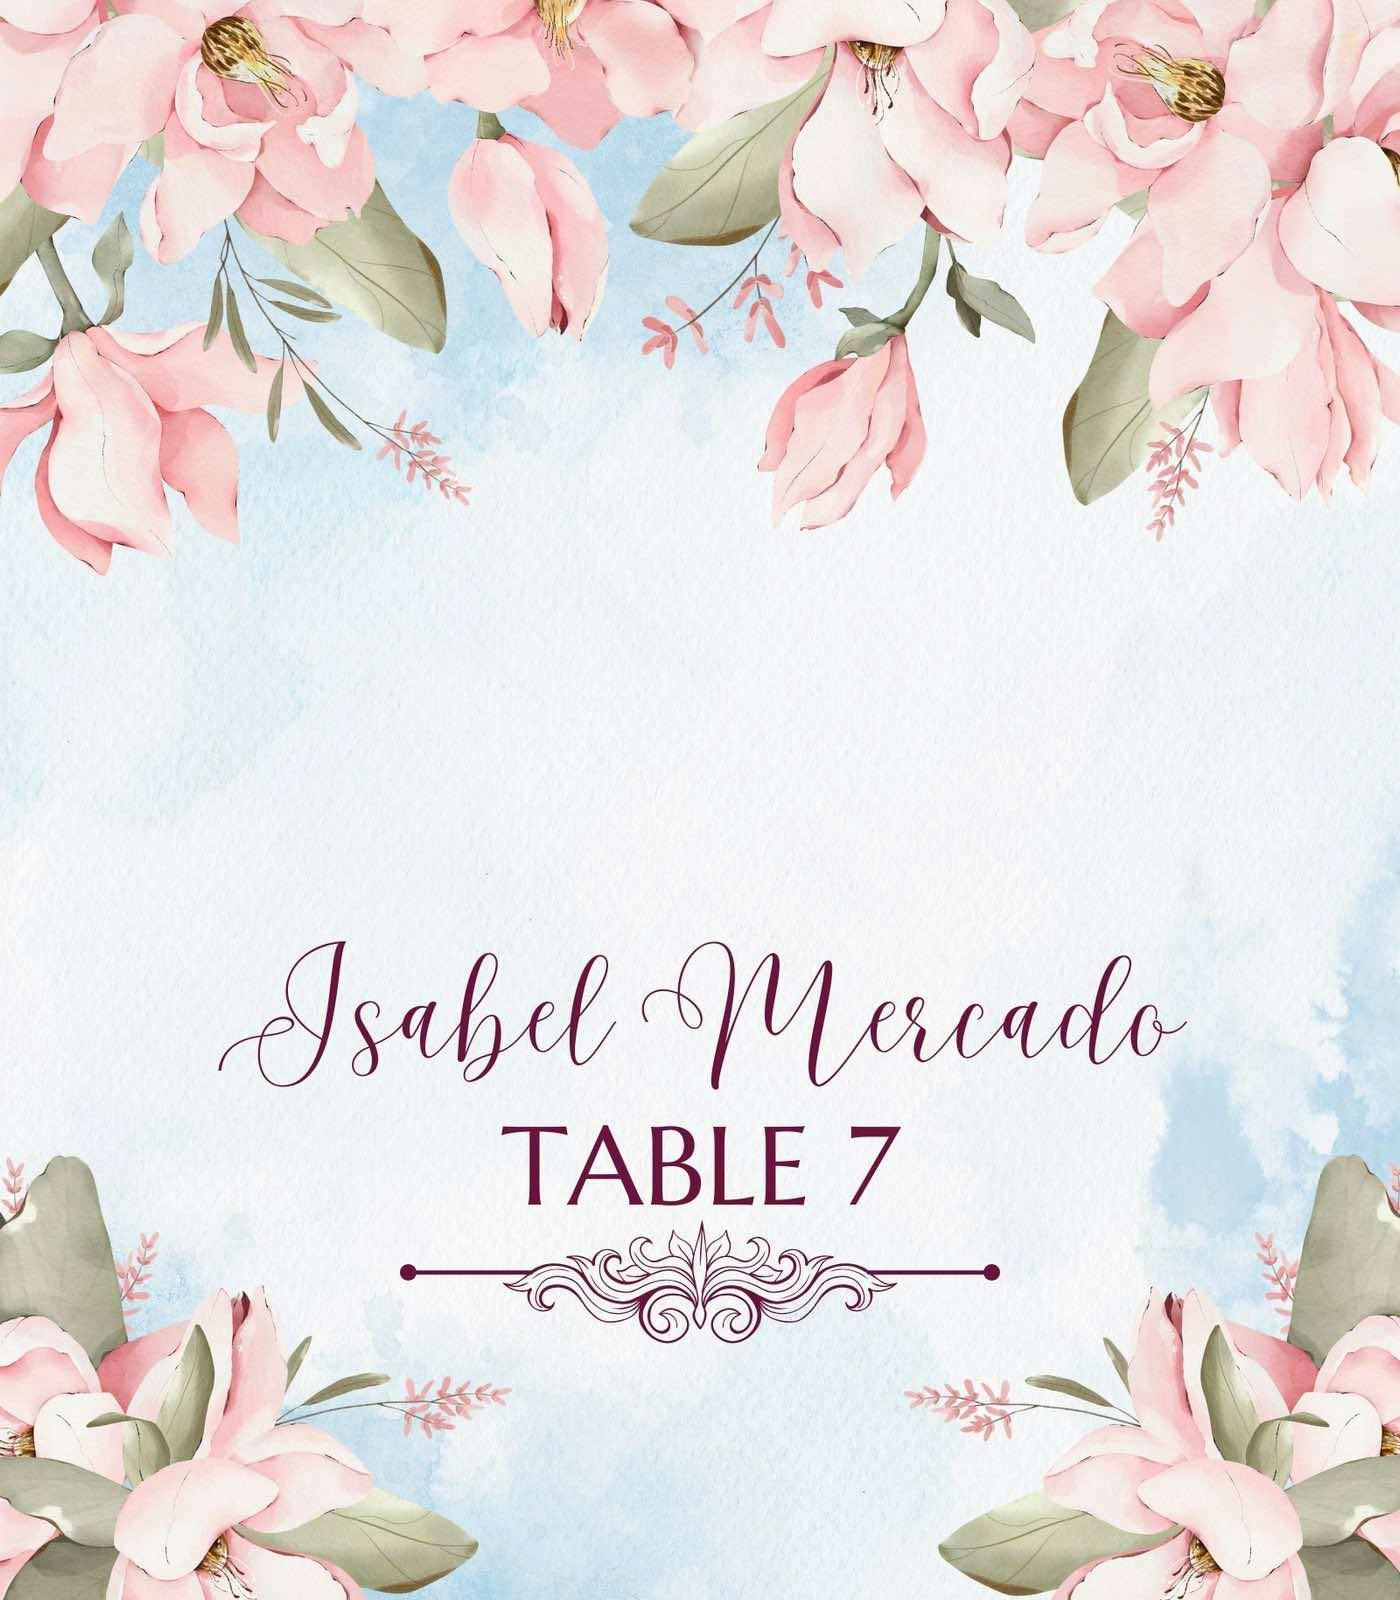 Top 10 Best Free Printable Place Cards PDF: Effortless Elegance for Your Event